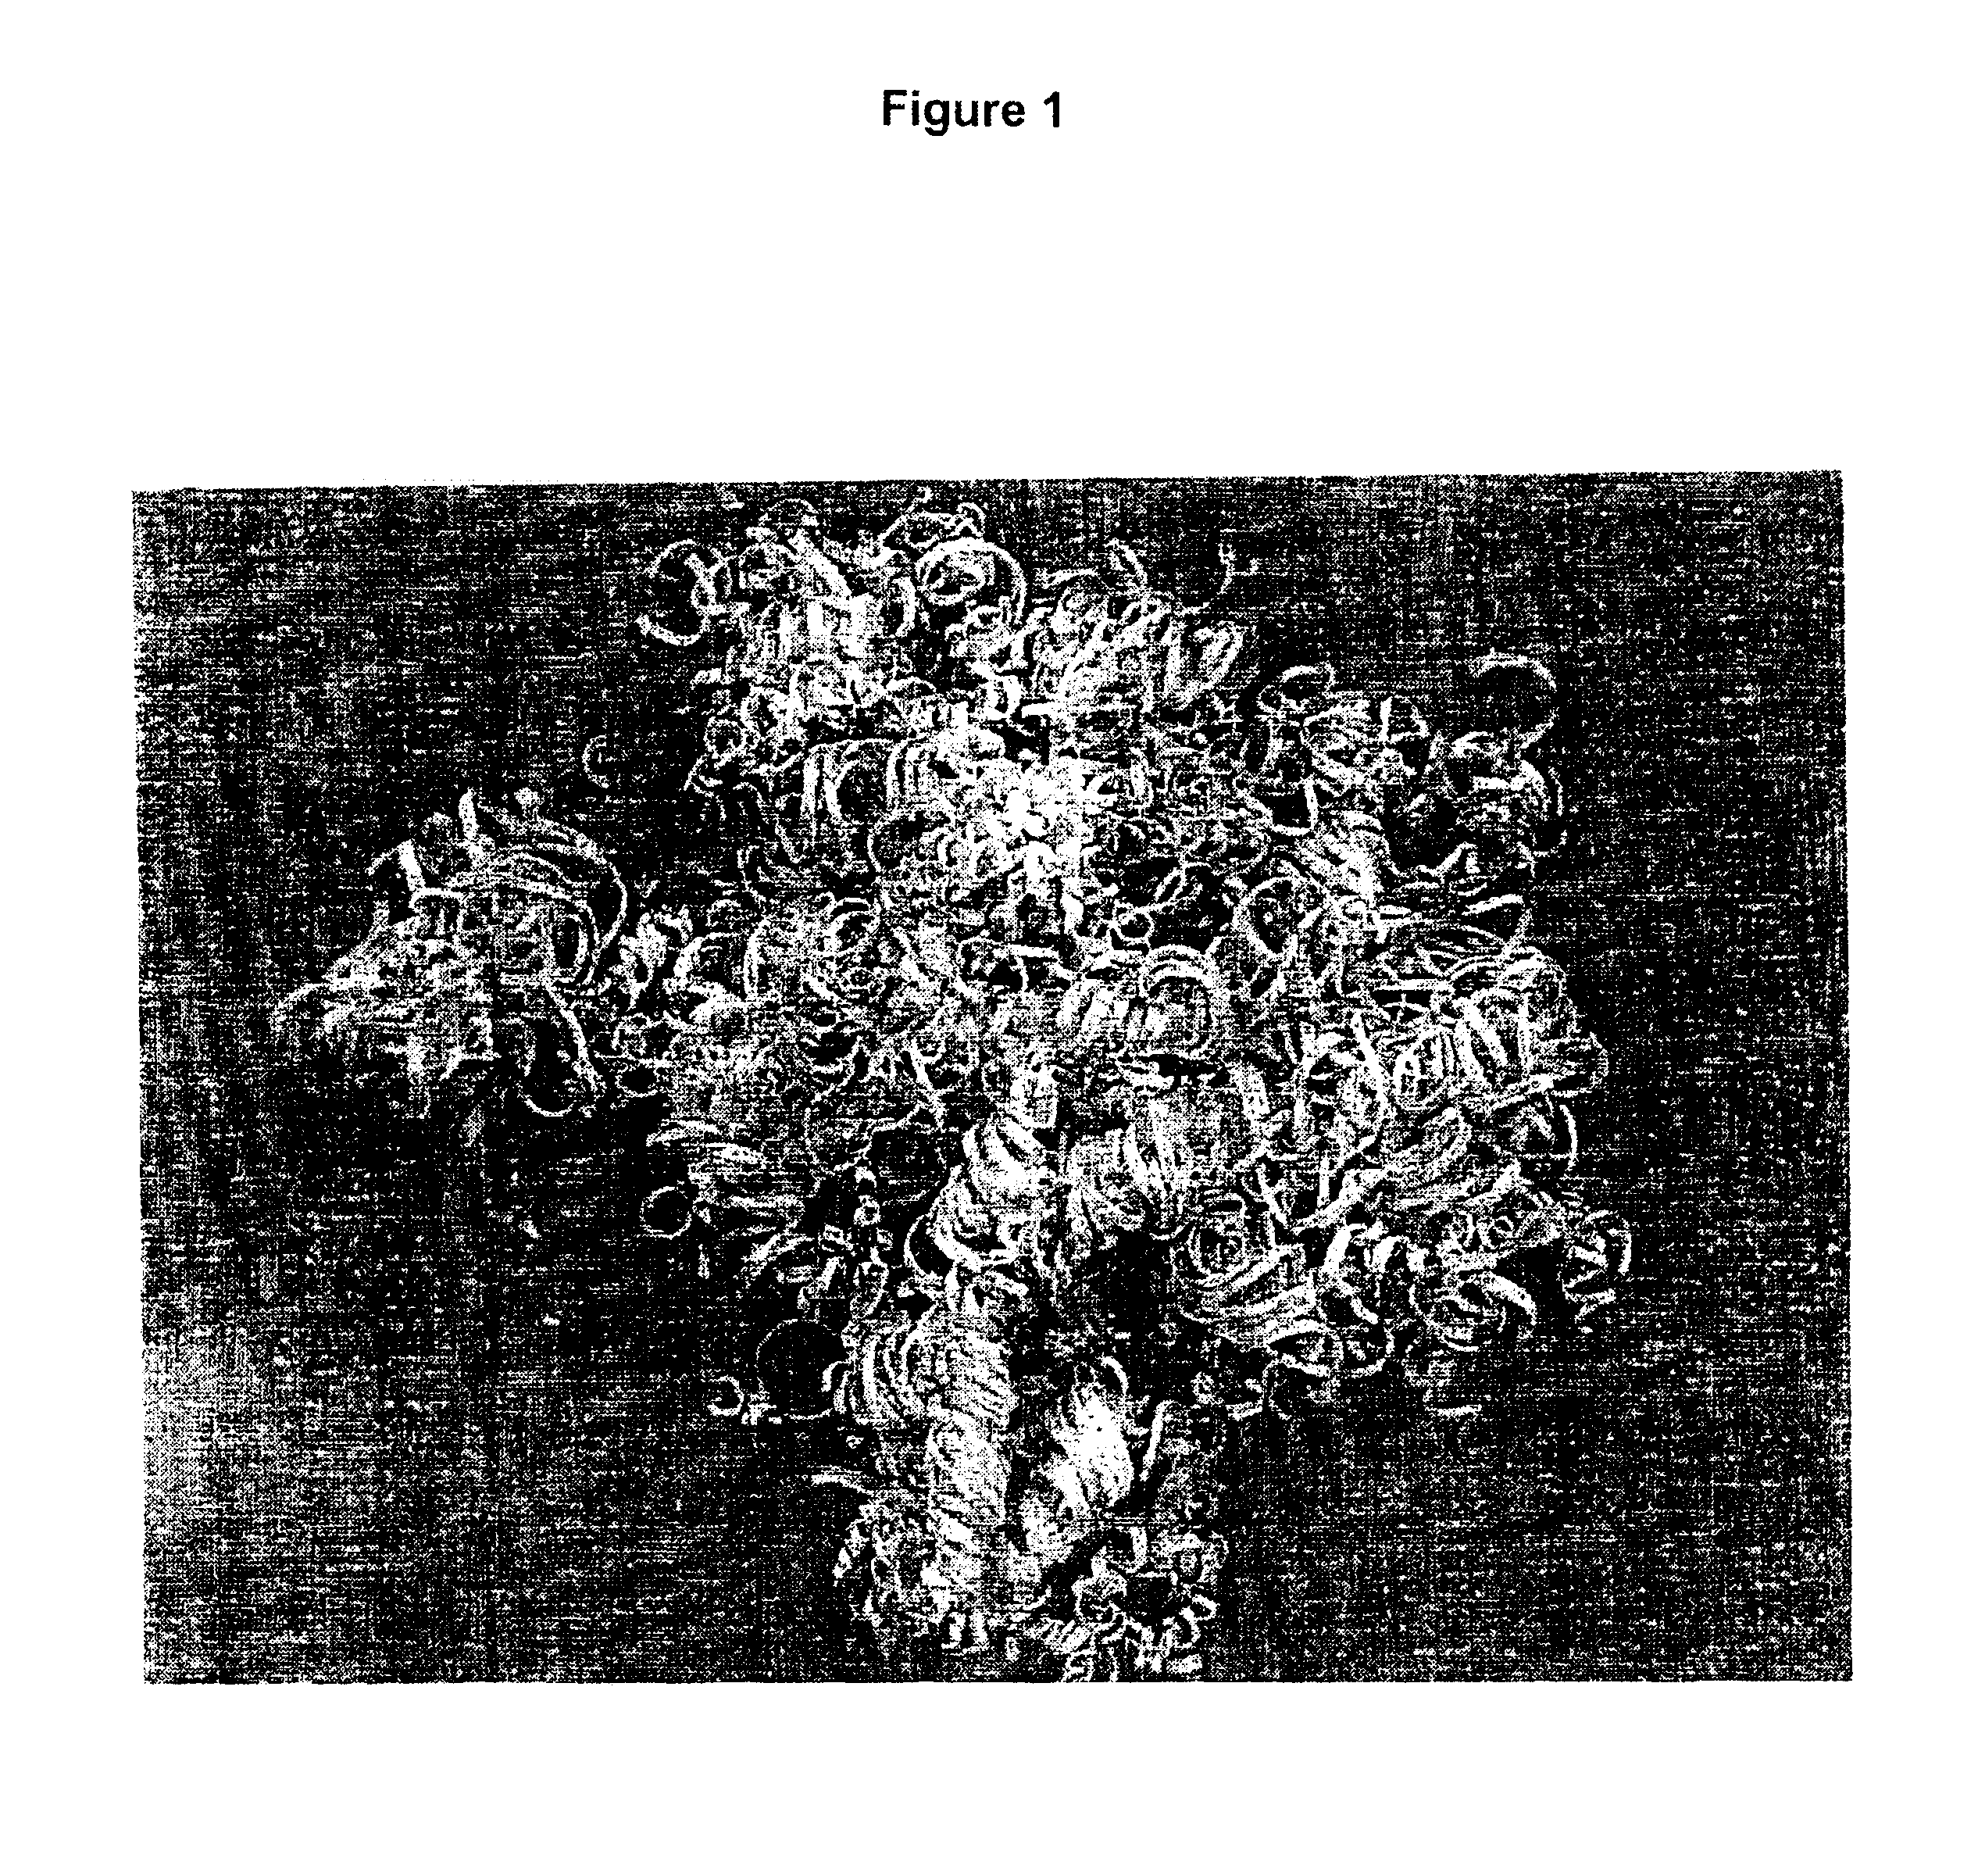 Device and process for producing fiber products and fiber products produced thereby